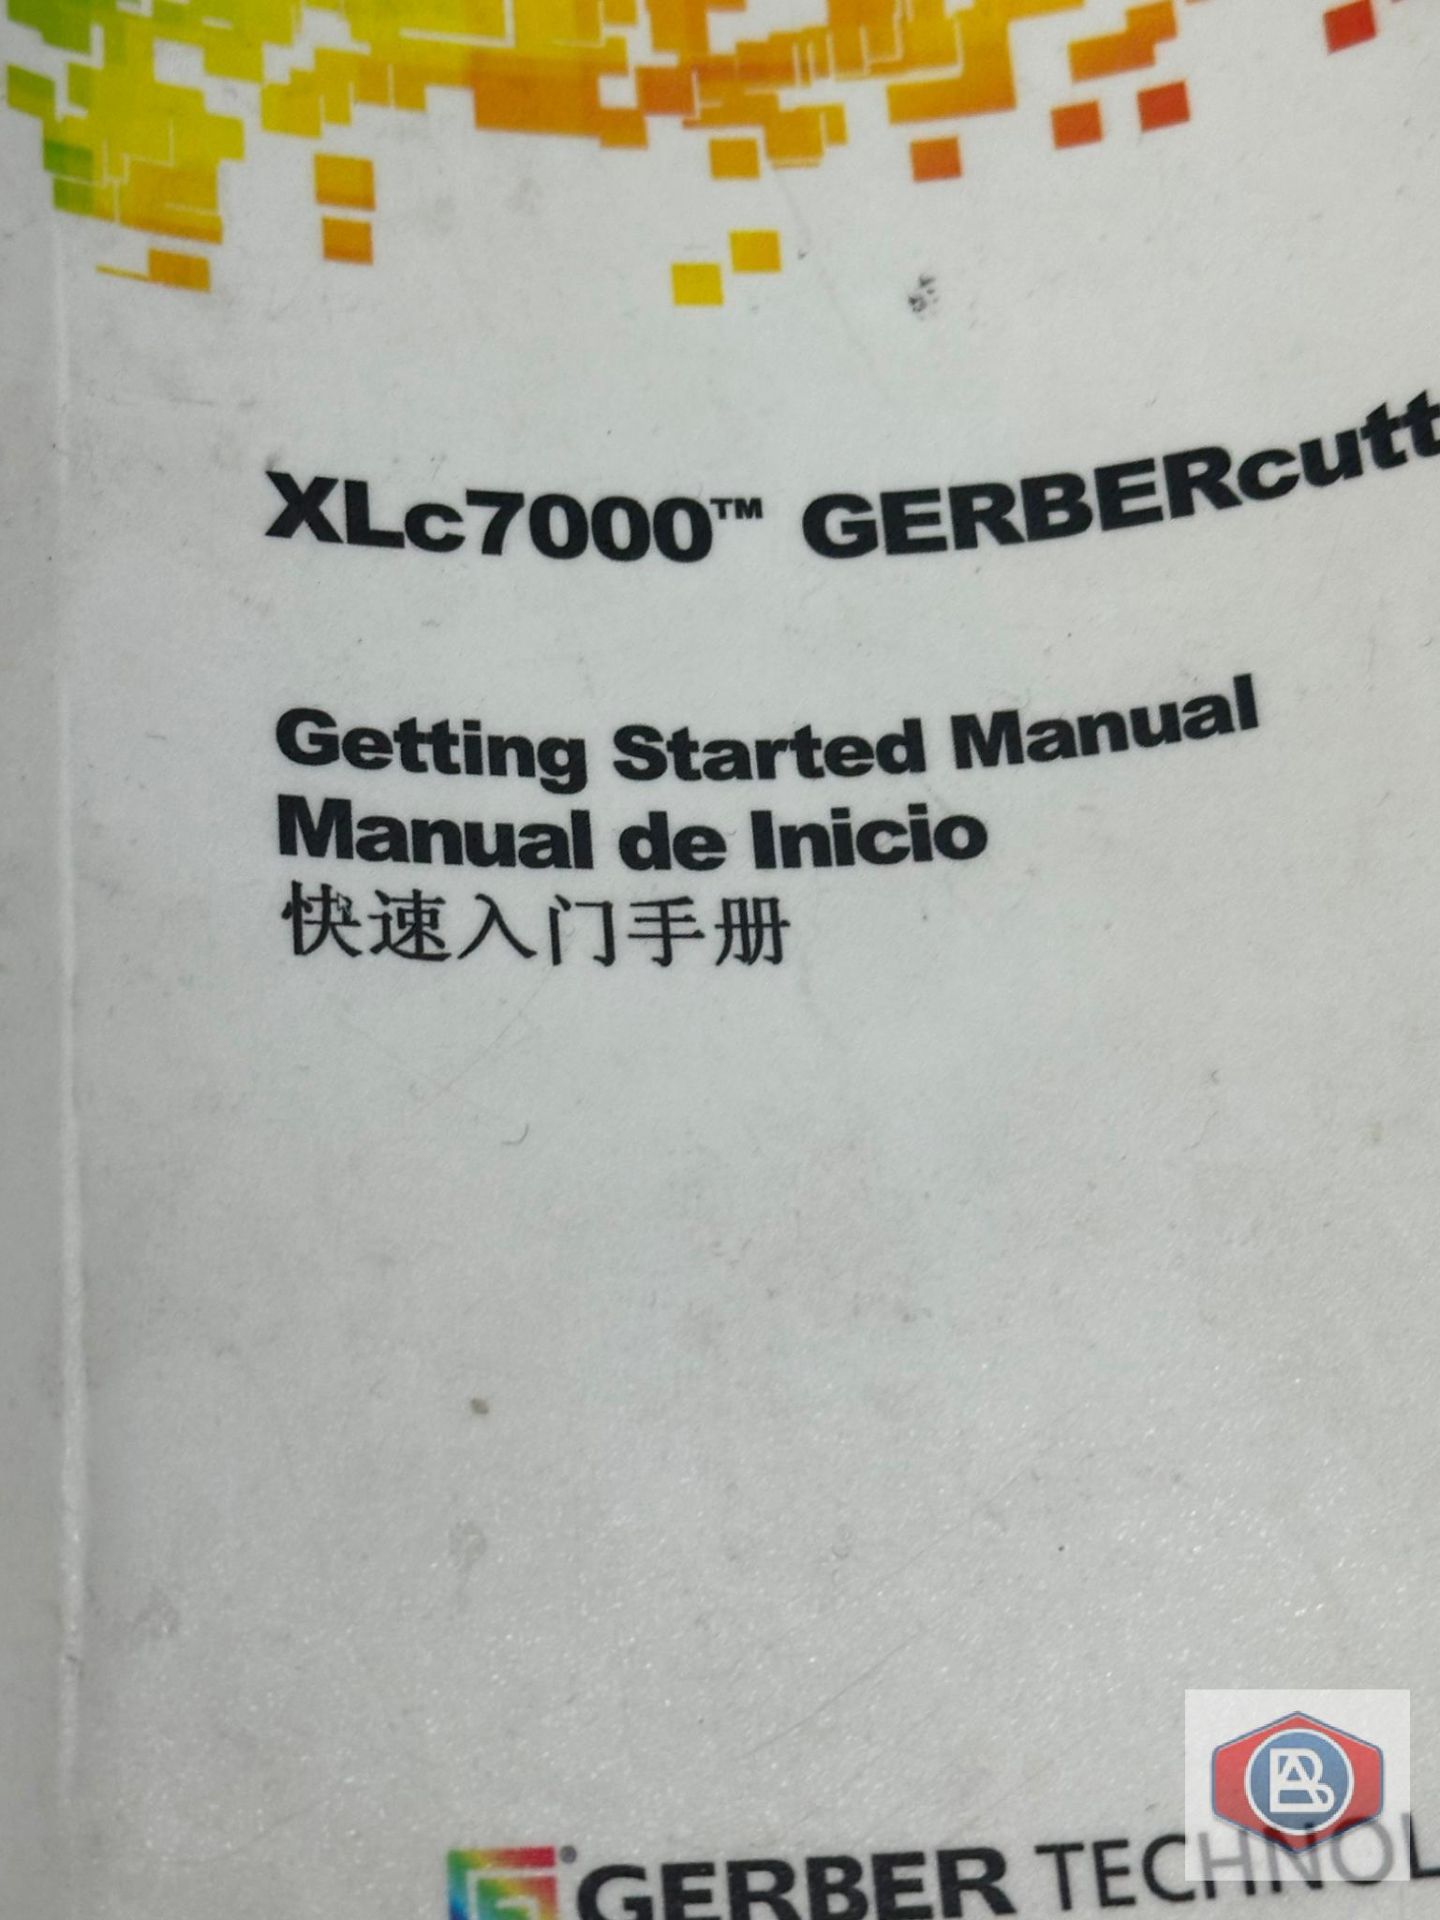 Gerber Automatic Cutter Model XLC7000 - Image 4 of 7